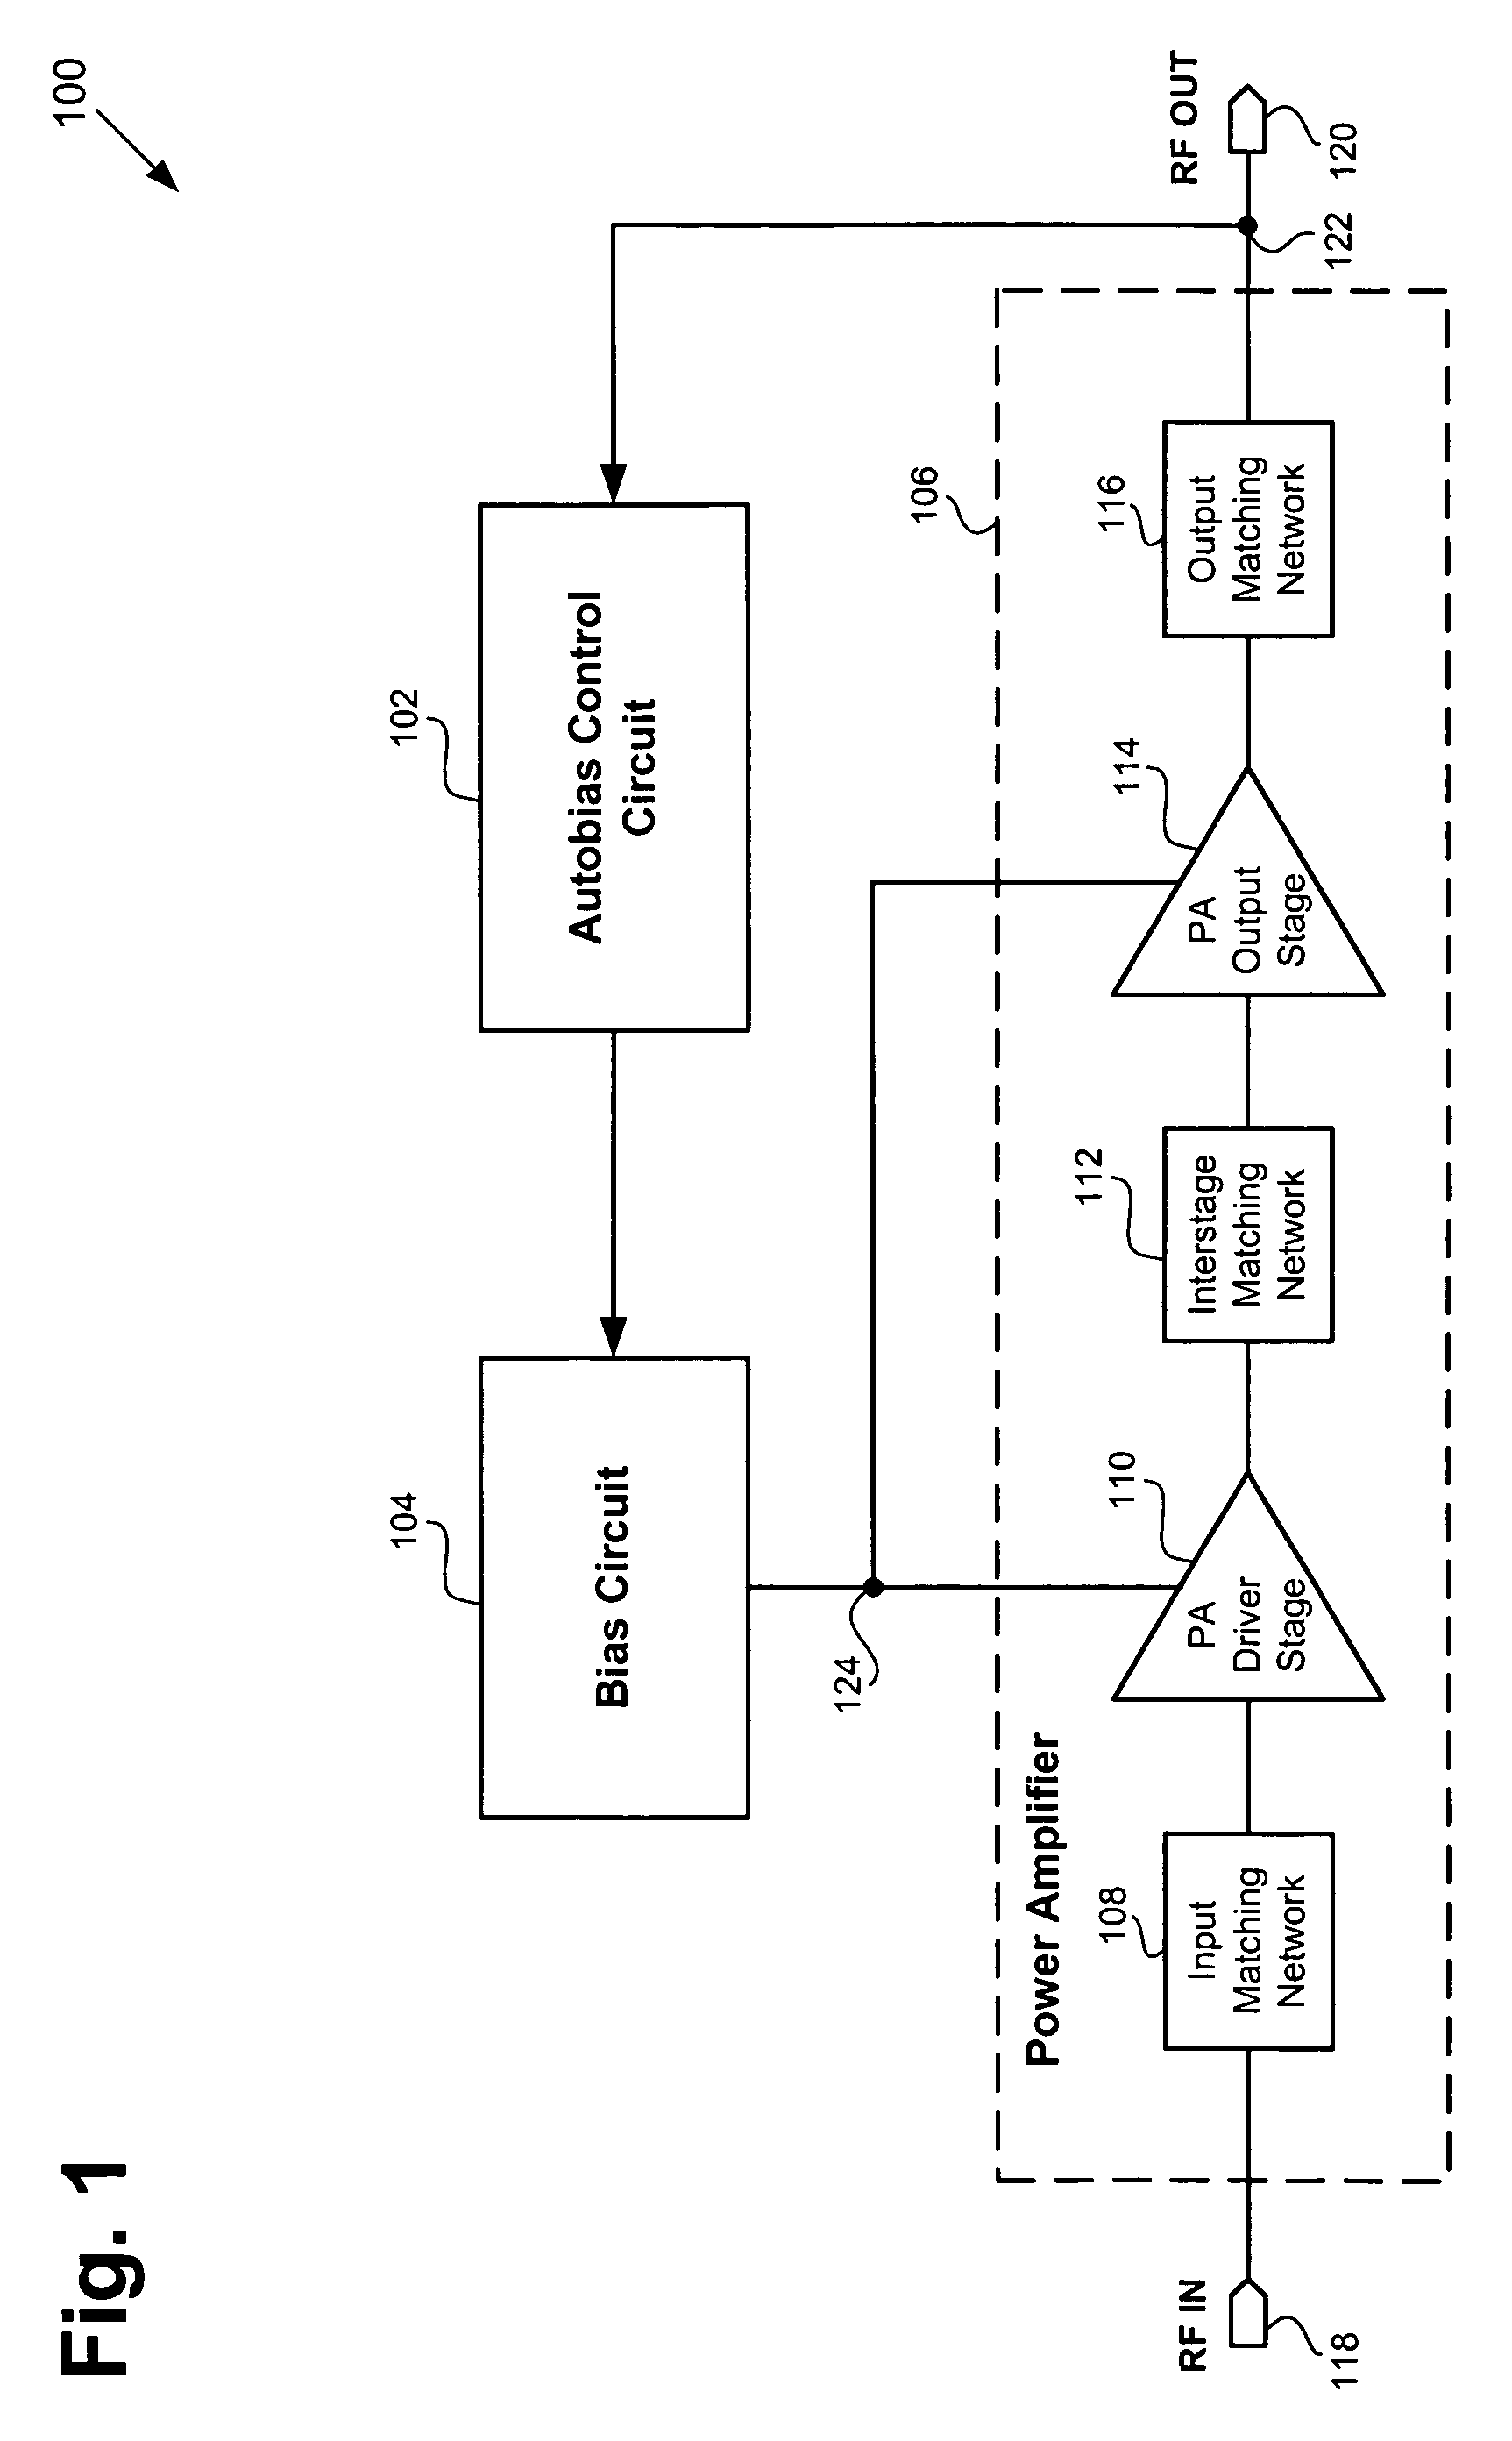 Automatic bias control circuit for linear power amplifiers